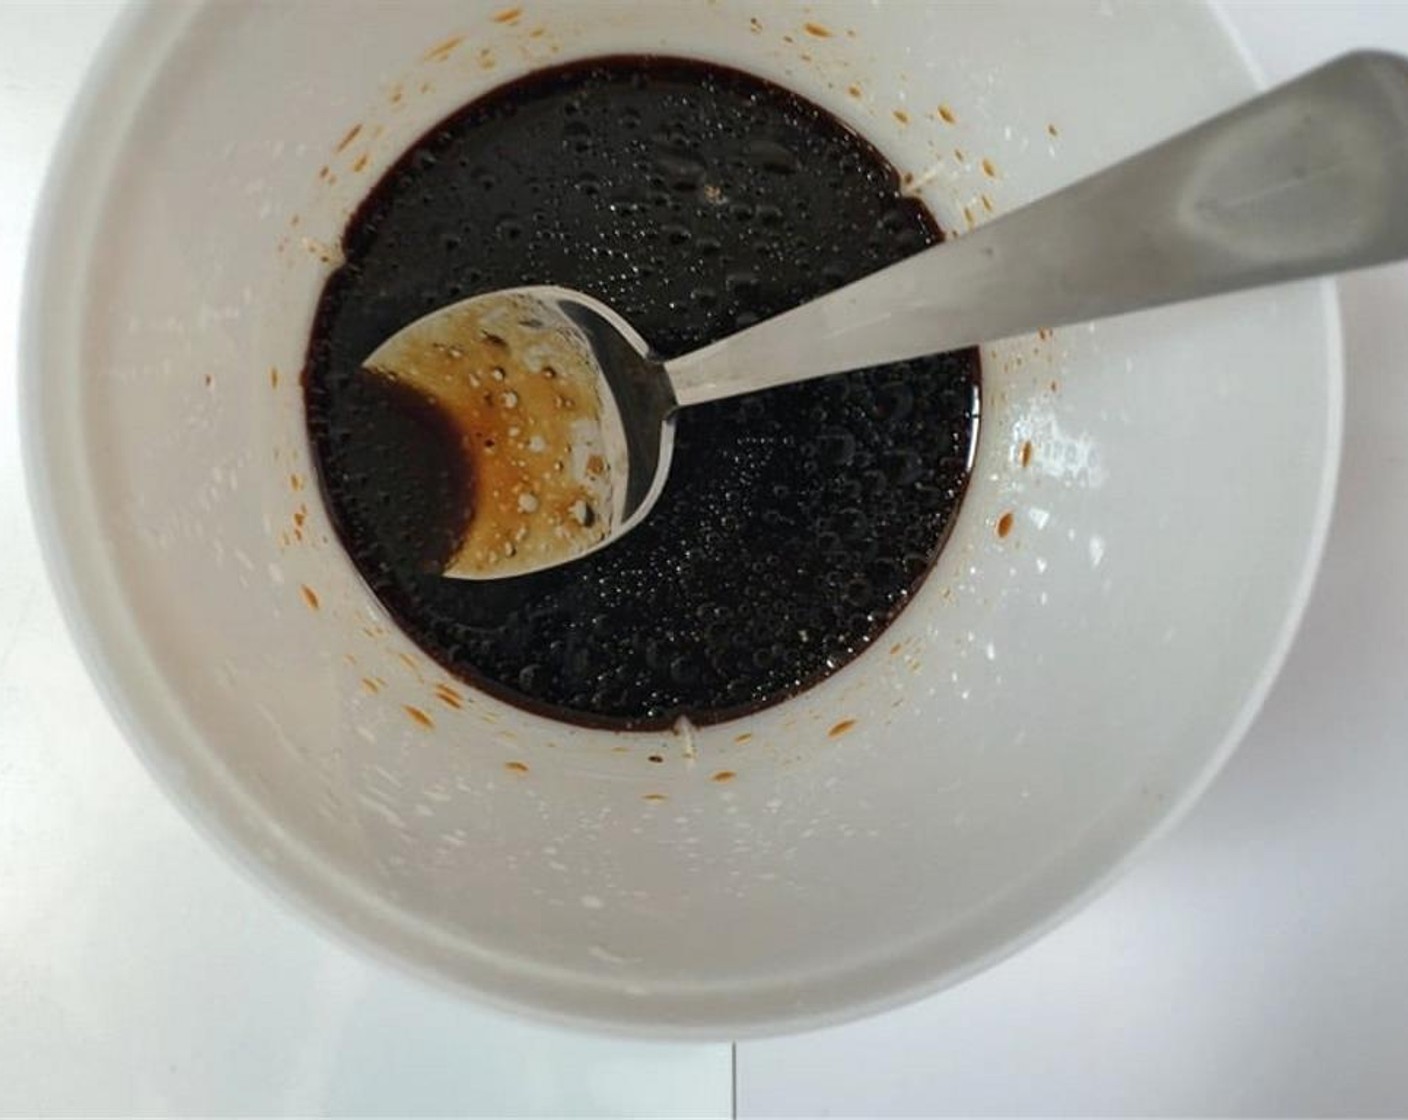 step 1 Pour the Sesame Oil (1 tsp), Dark Soy Sauce (1 Tbsp), Fish Sauce (1 tsp), Oyster Sauce (1 tsp), and Shaoxing Cooking Wine (1 Tbsp) in a small cup. Season with Salt (1 pinch), Ground Black Pepper (1 pinch), and Granulated Sugar (1 pinch). Stir well and set aside.